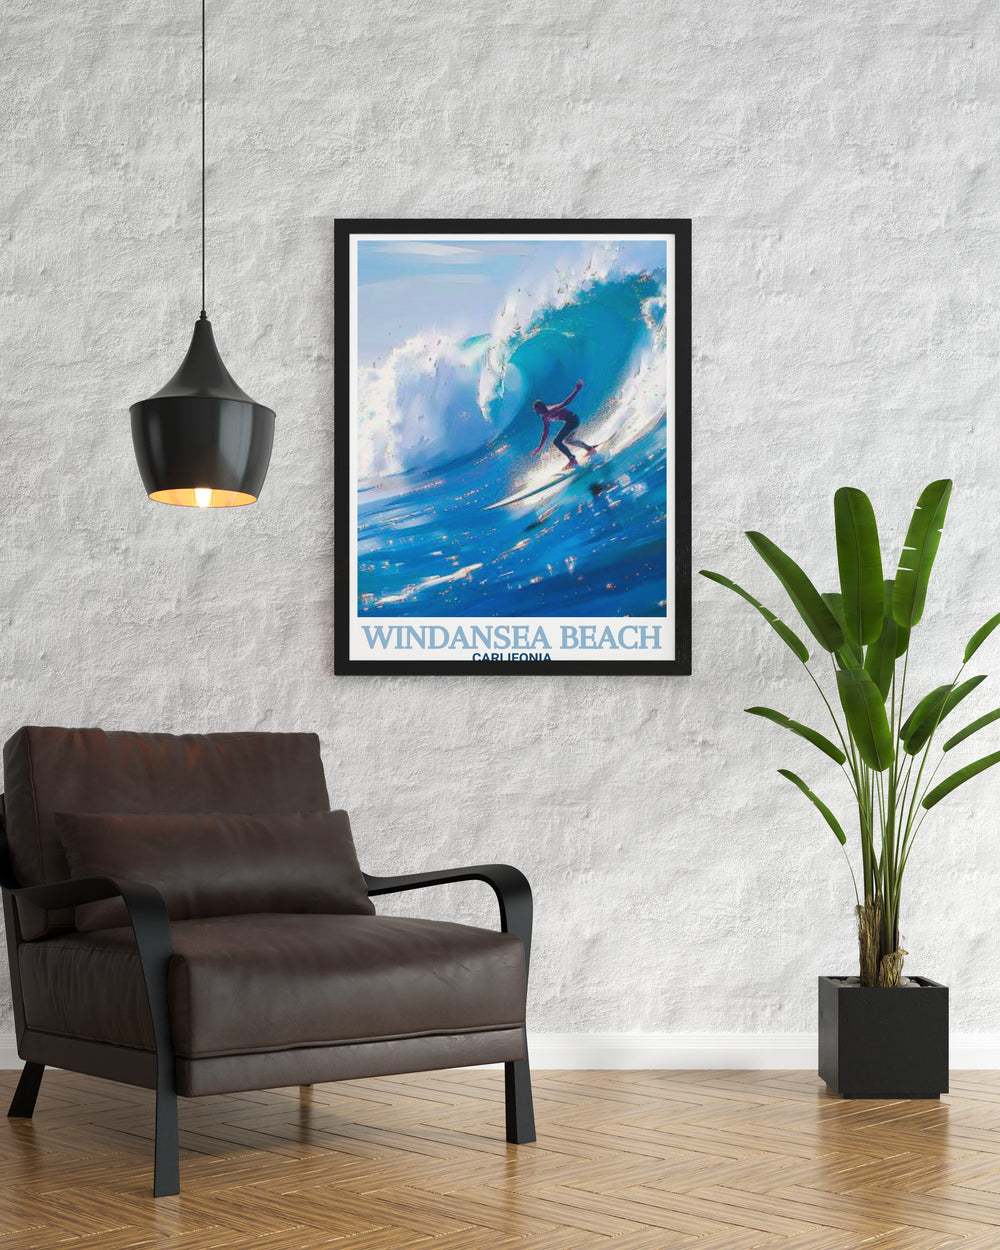 La Jolla Poster showcasing stunning Surfing Waves and rock formations perfect for modern decor. This vintage California poster is a wonderful travel poster print and an excellent personalized gift for those who love the beach.